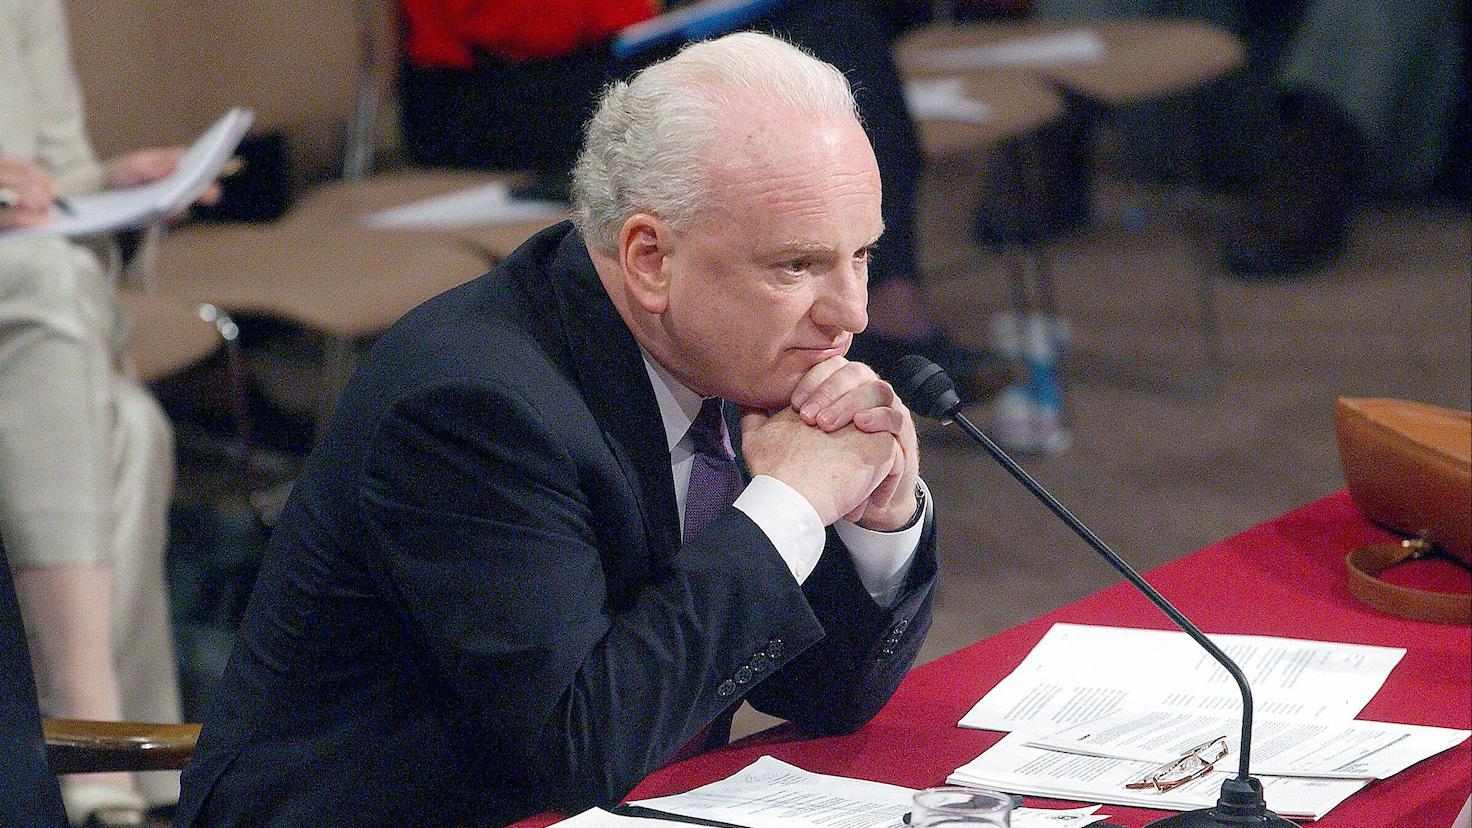 © Olivier Douliery/ABACA. 57662 1. Washington DC USA, March 24, 2004. Richard Clarke testifies before the 9 11 commission on the formulation and conduct of U.S counter terrorism policy